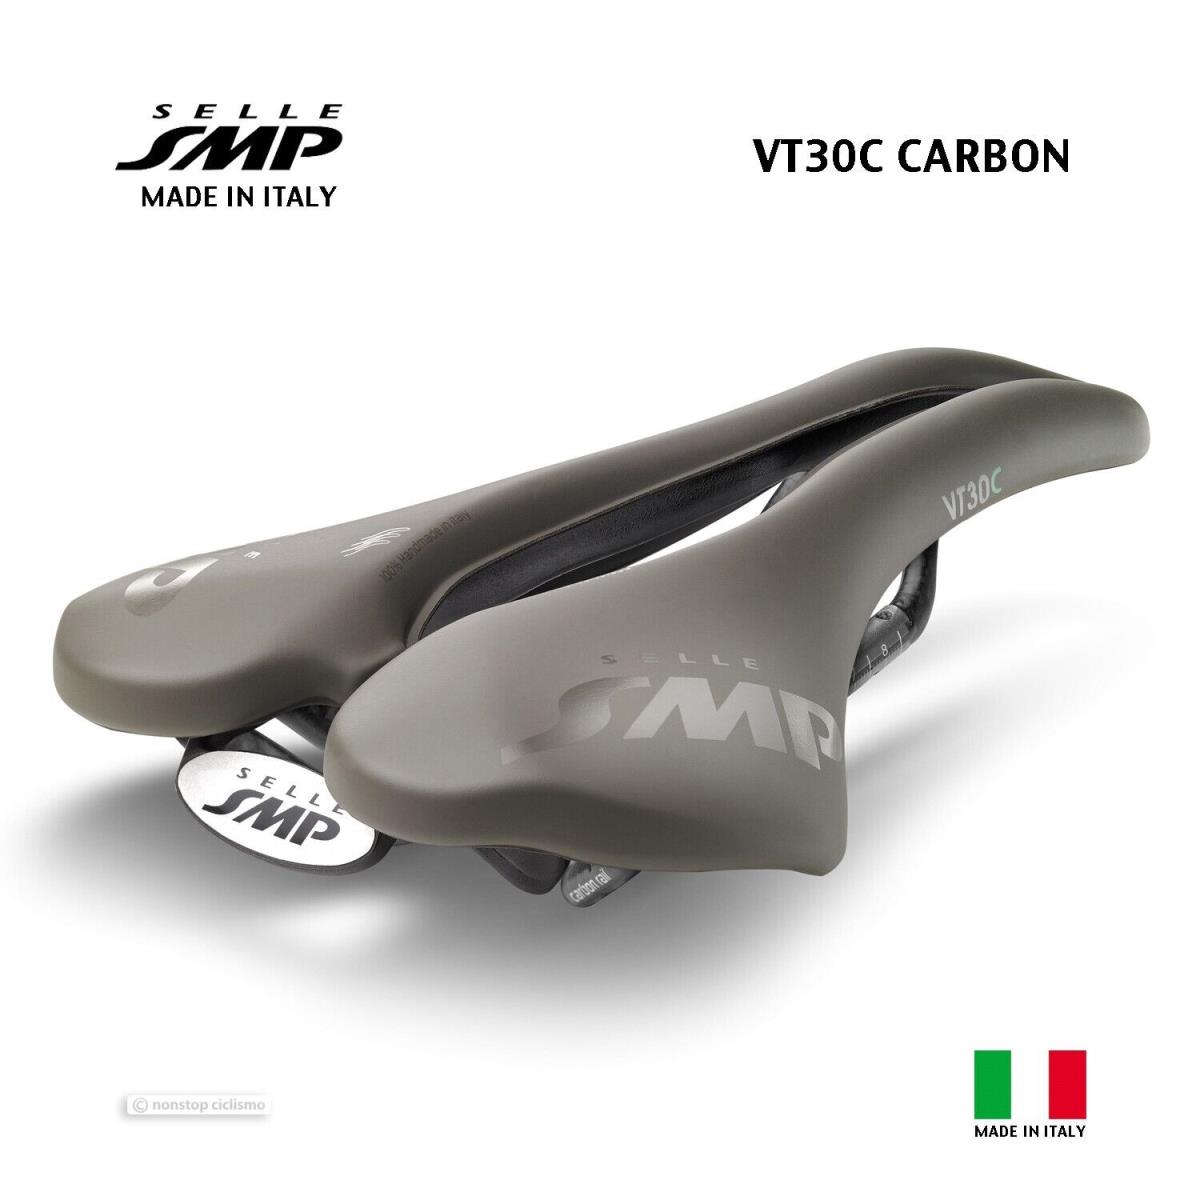 Selle Smp VT30C Carbon Saddle : Grey-brown Gravel - Made IN Italy